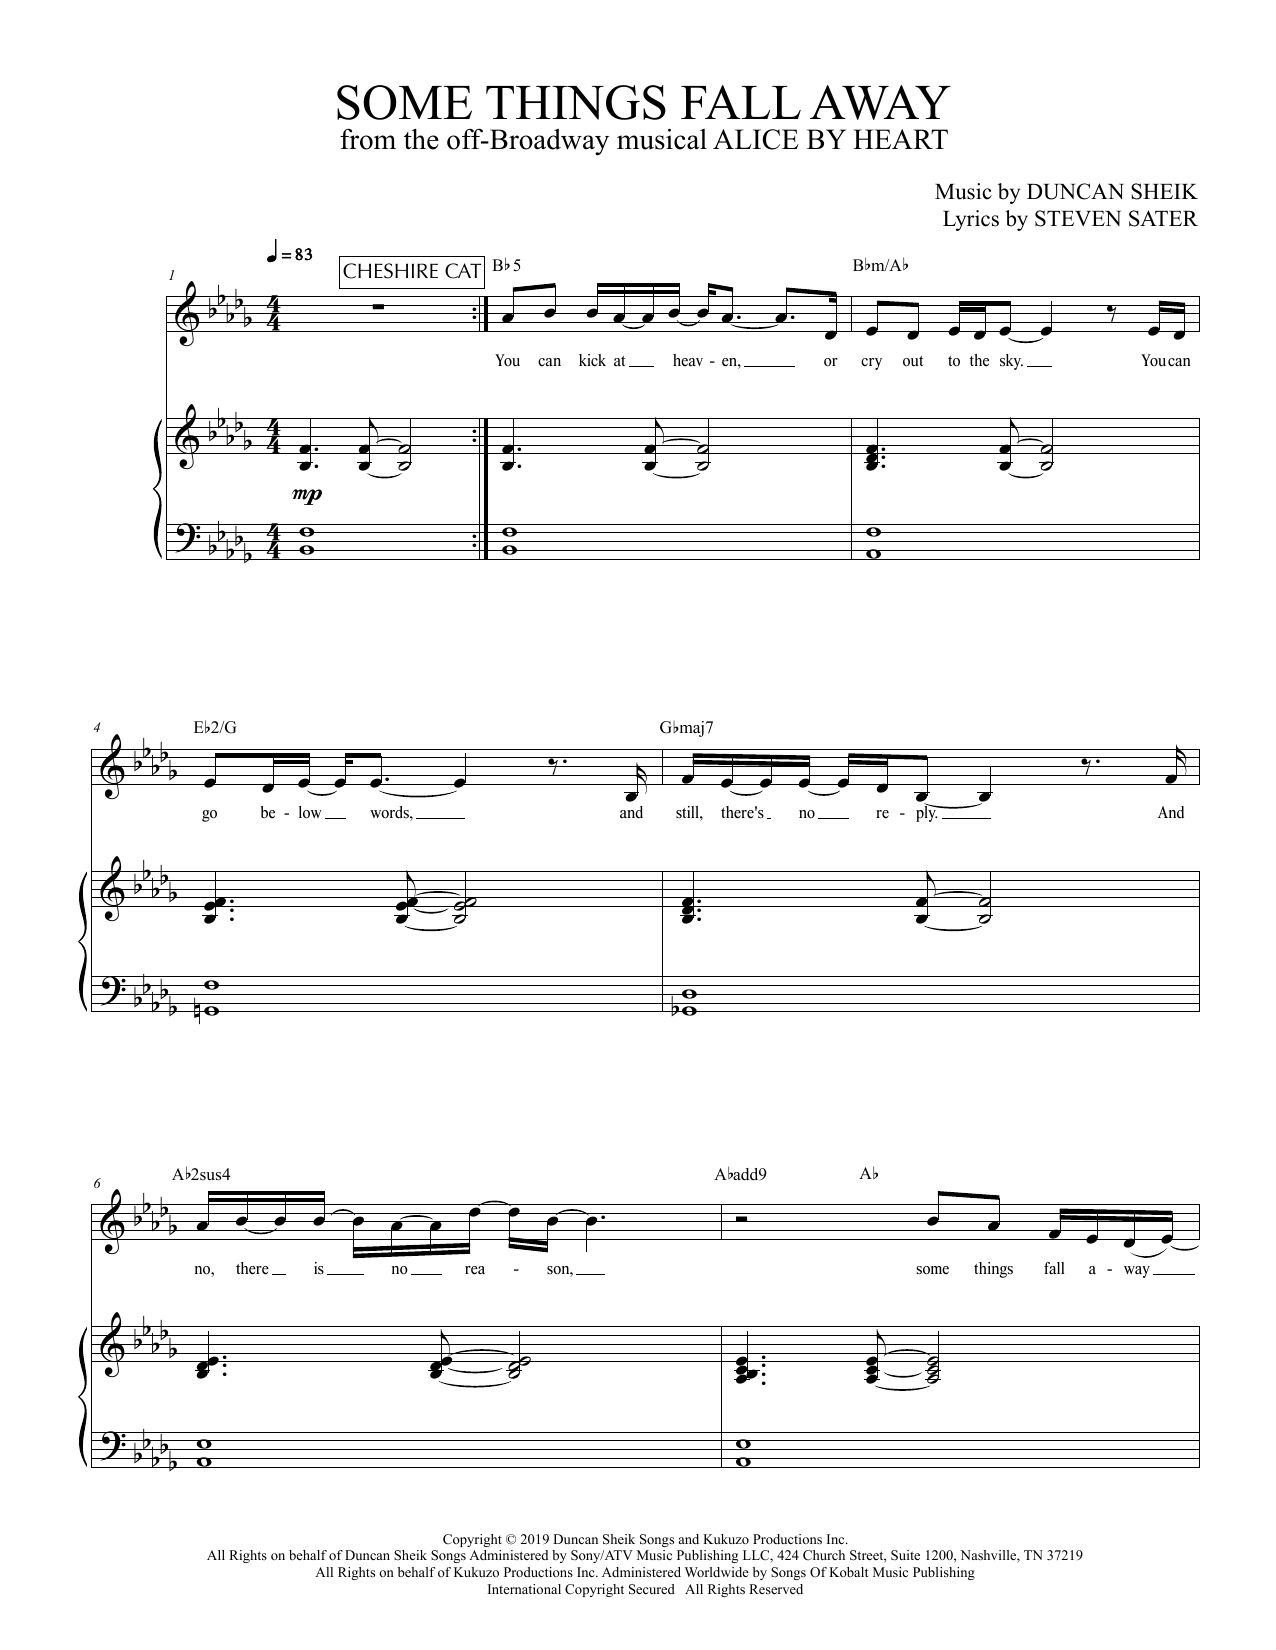 Download Duncan Sheik and Steven Sater Some Things Fall Away (from Alice By He Sheet Music